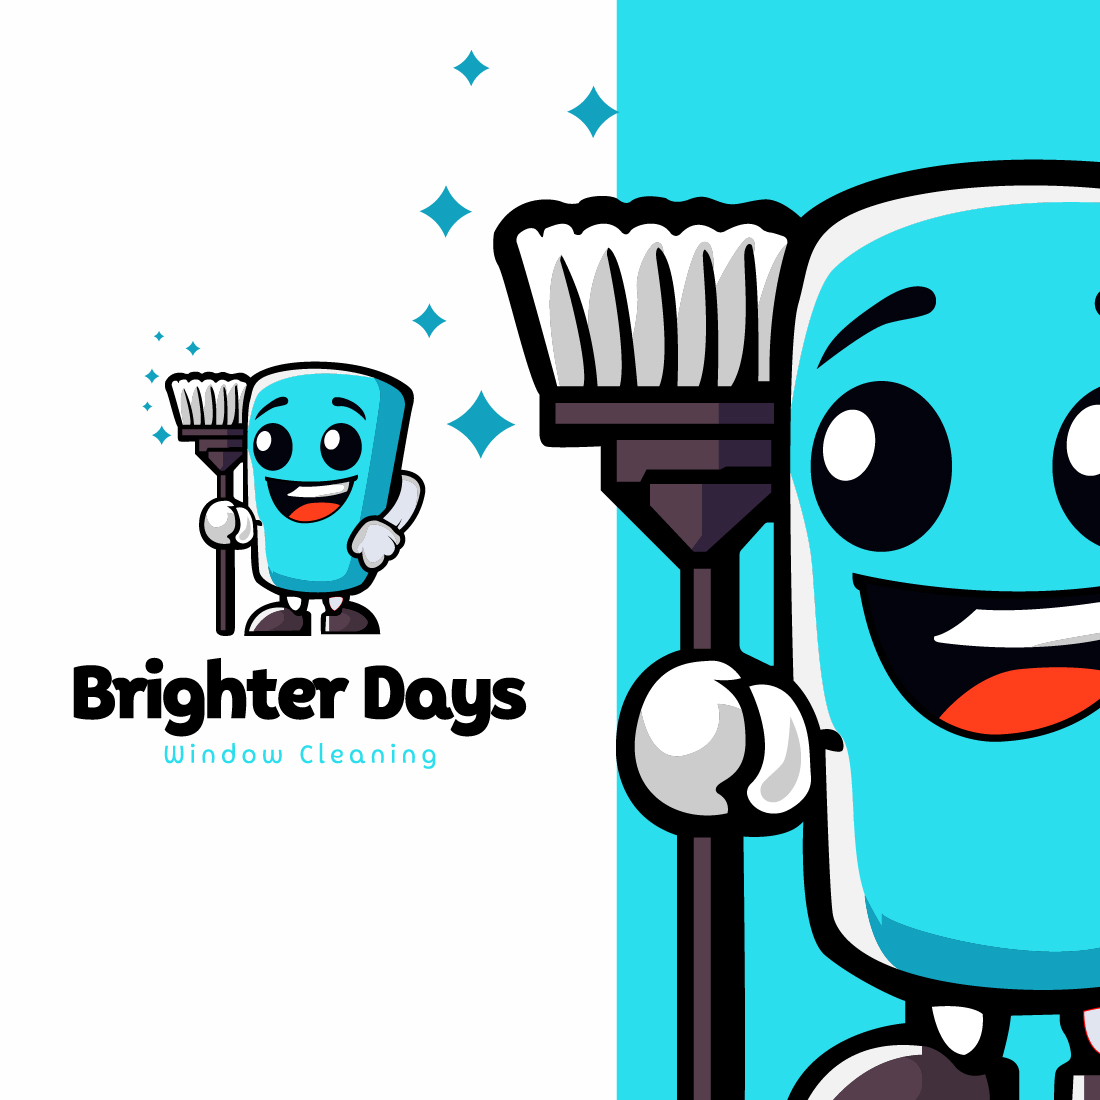 Cute Window Cleaning Mascot logo Template cover image.